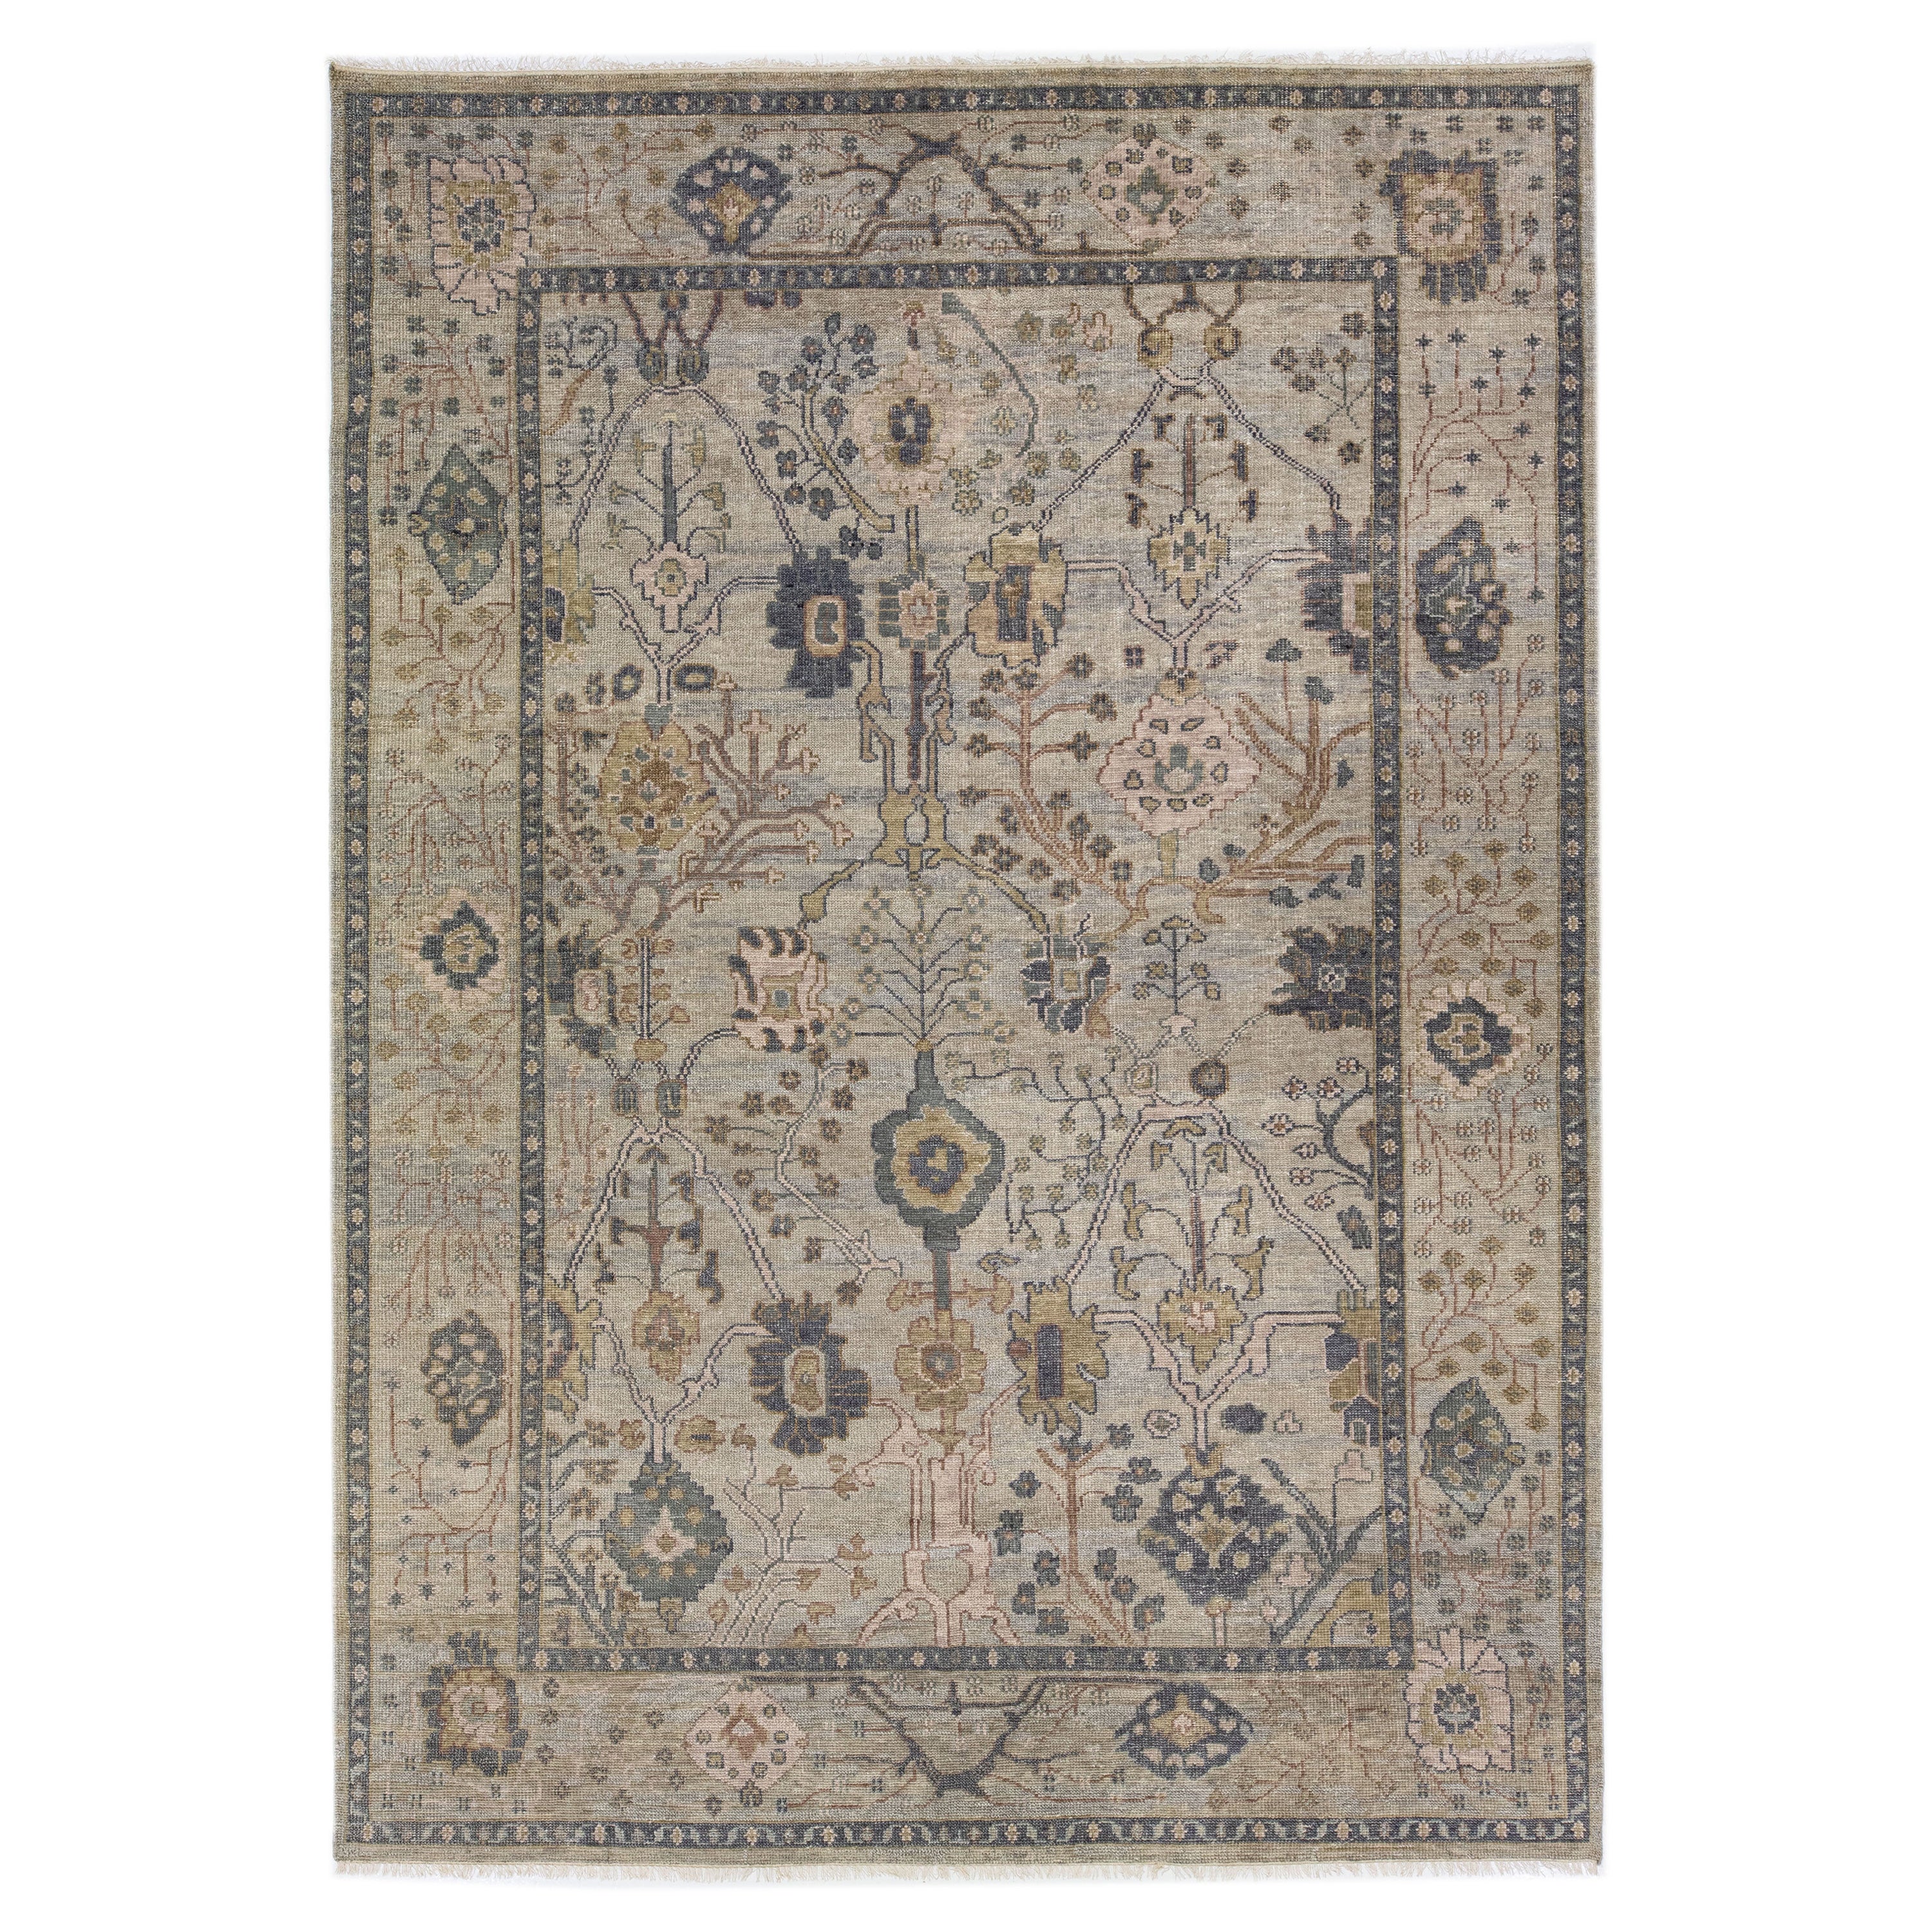 Modern Oushak Style Wool Rug Handmade with Allover Floral Motif in Grey